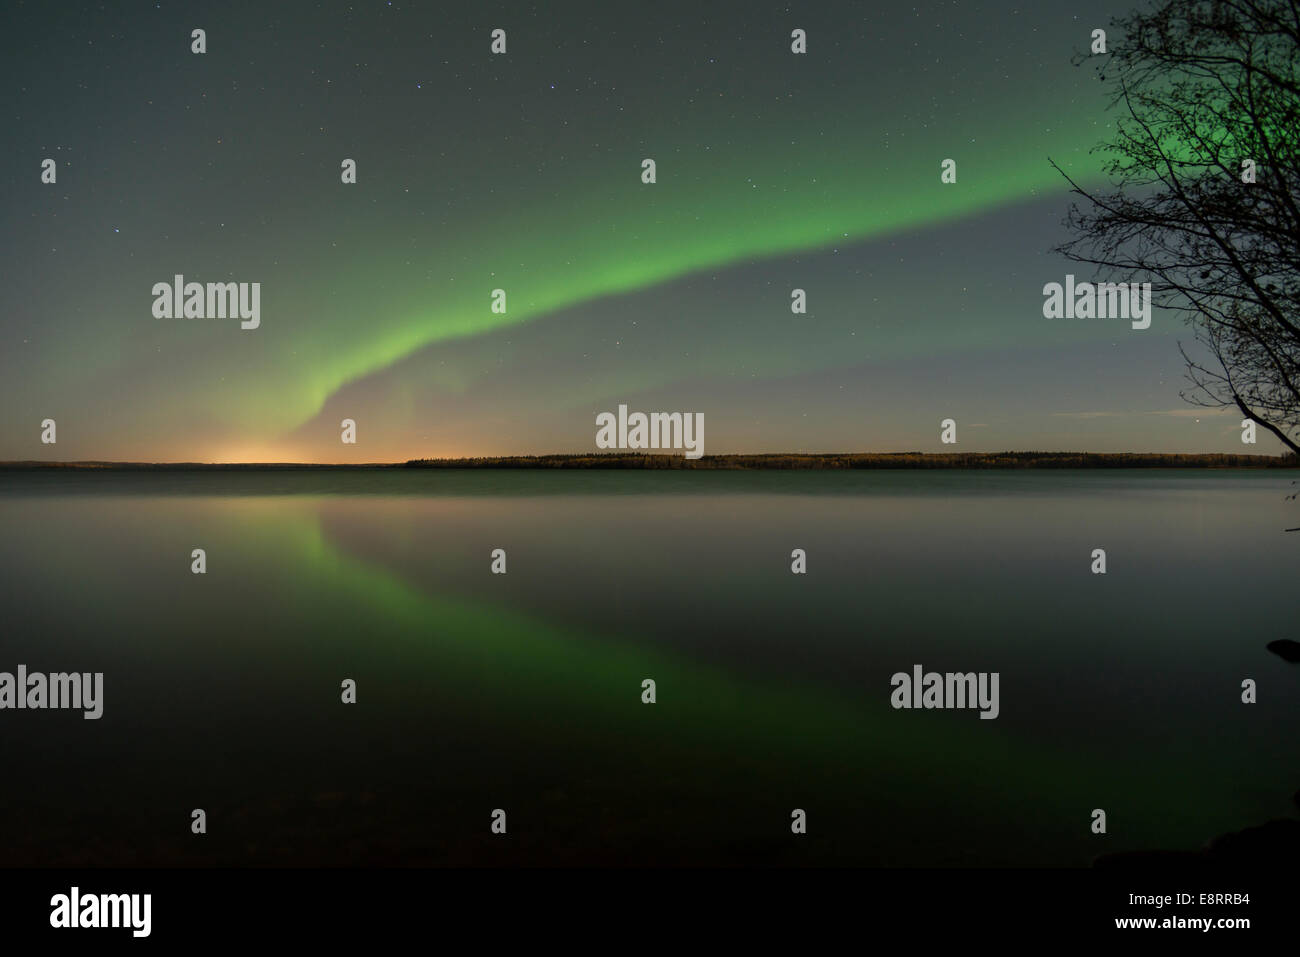 Norther lights with a reflection in the water with a silhouette of a tree. Stock Photo